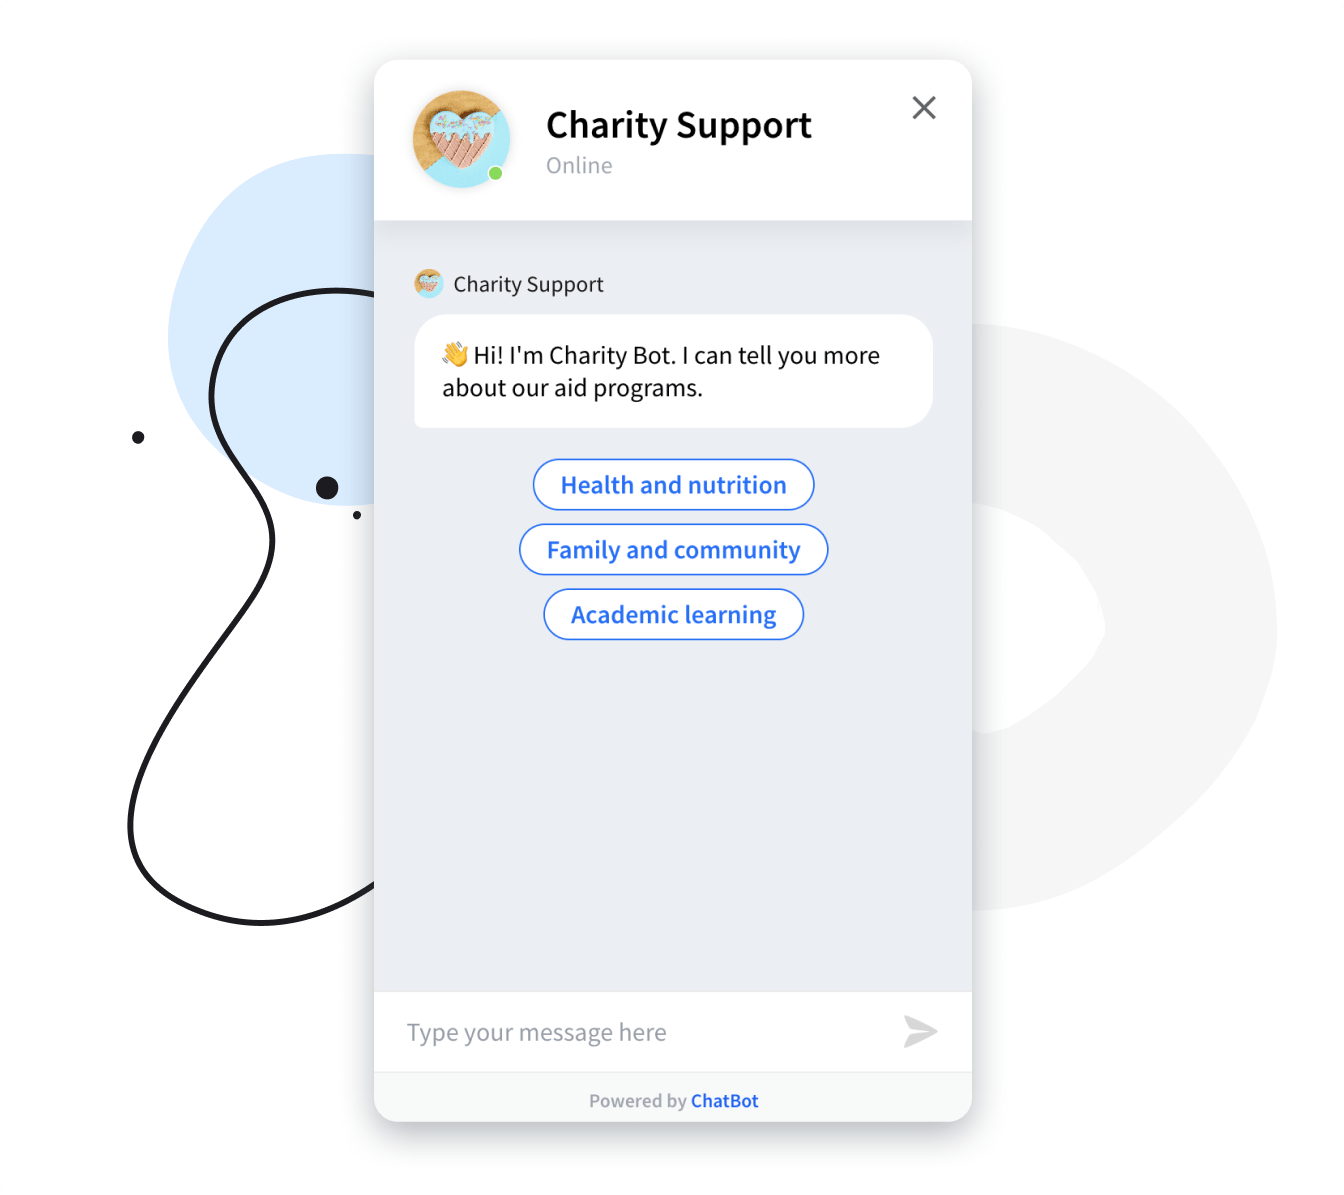 The image of an after-hours chat bot for non-profit organizations